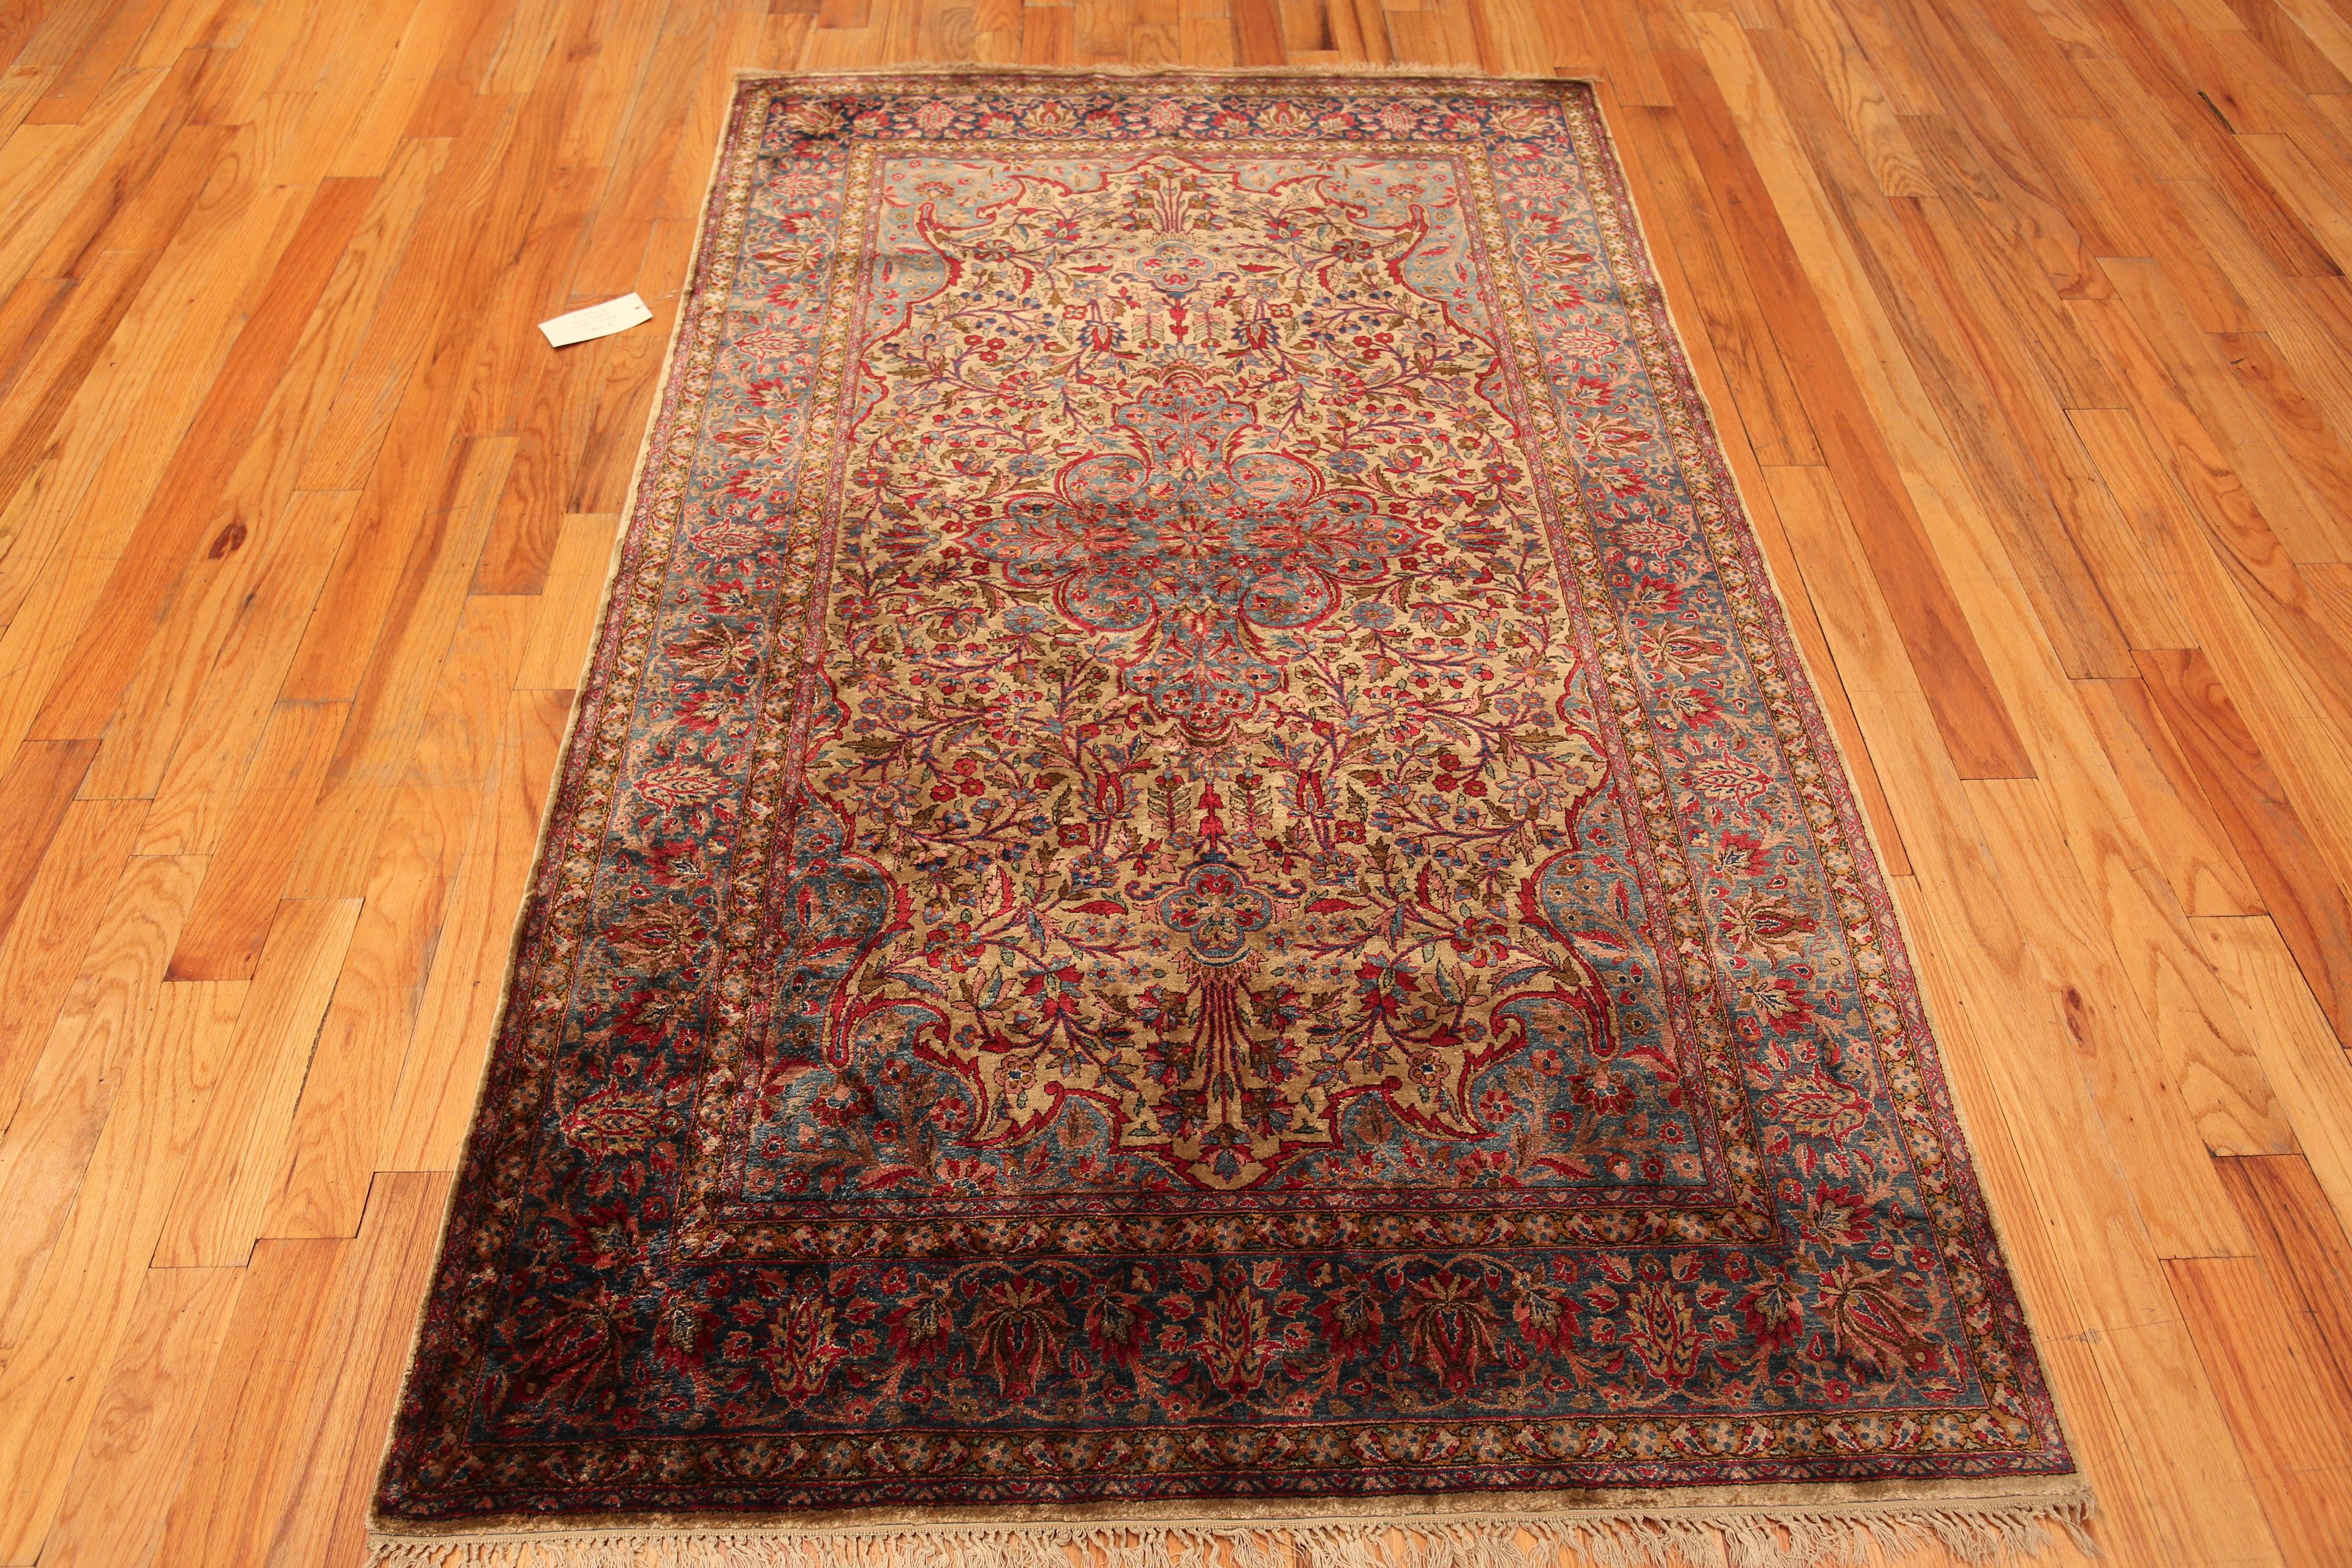 Silk Antique Persian Kashan Rug, Country of origin: Persia, Circa date: 1900. Size: 4 ft 3 in x 6 ft 11 in (1.3 m x 2.11 m)

